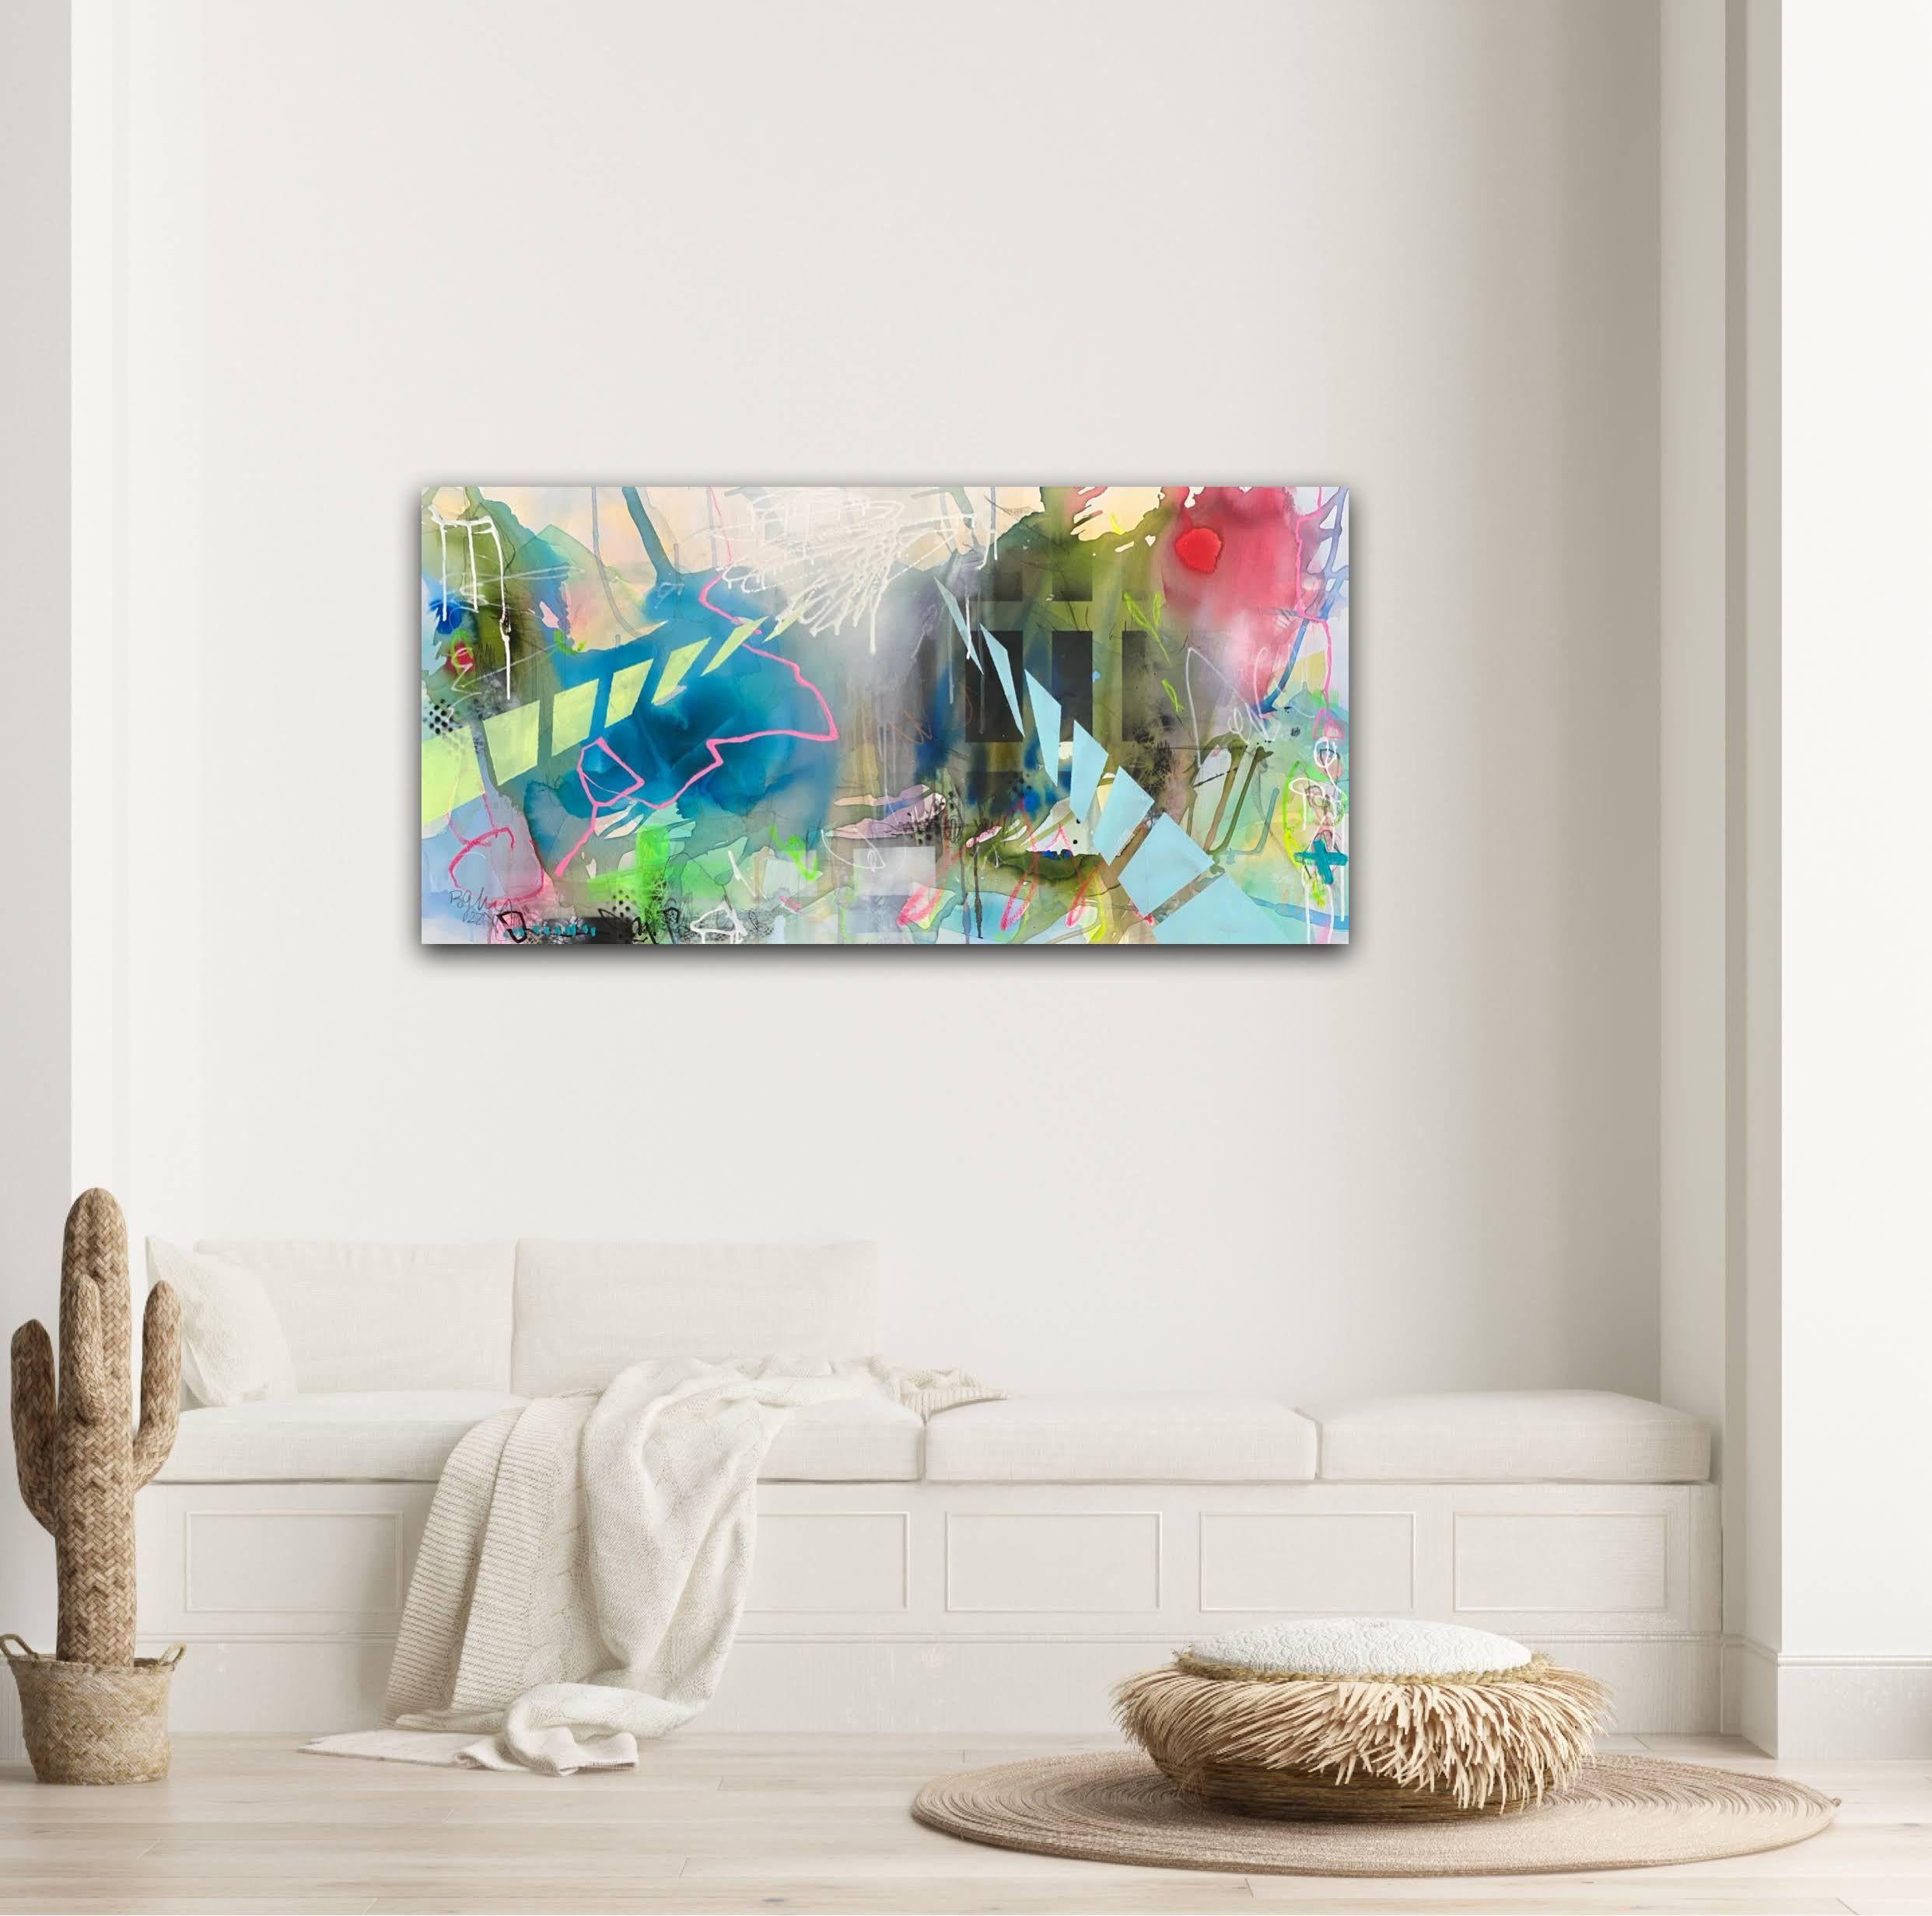 It is all a dream No.3 is a large abstract painting 120 cm/47.24 in W x 60 cm/23.62 in H, 4 cm/1,56 in deep. The painting is mixed media ( acrylics, spray paint, ink, neon paint, soft pastels ) on high quality canvas.    I love the song 